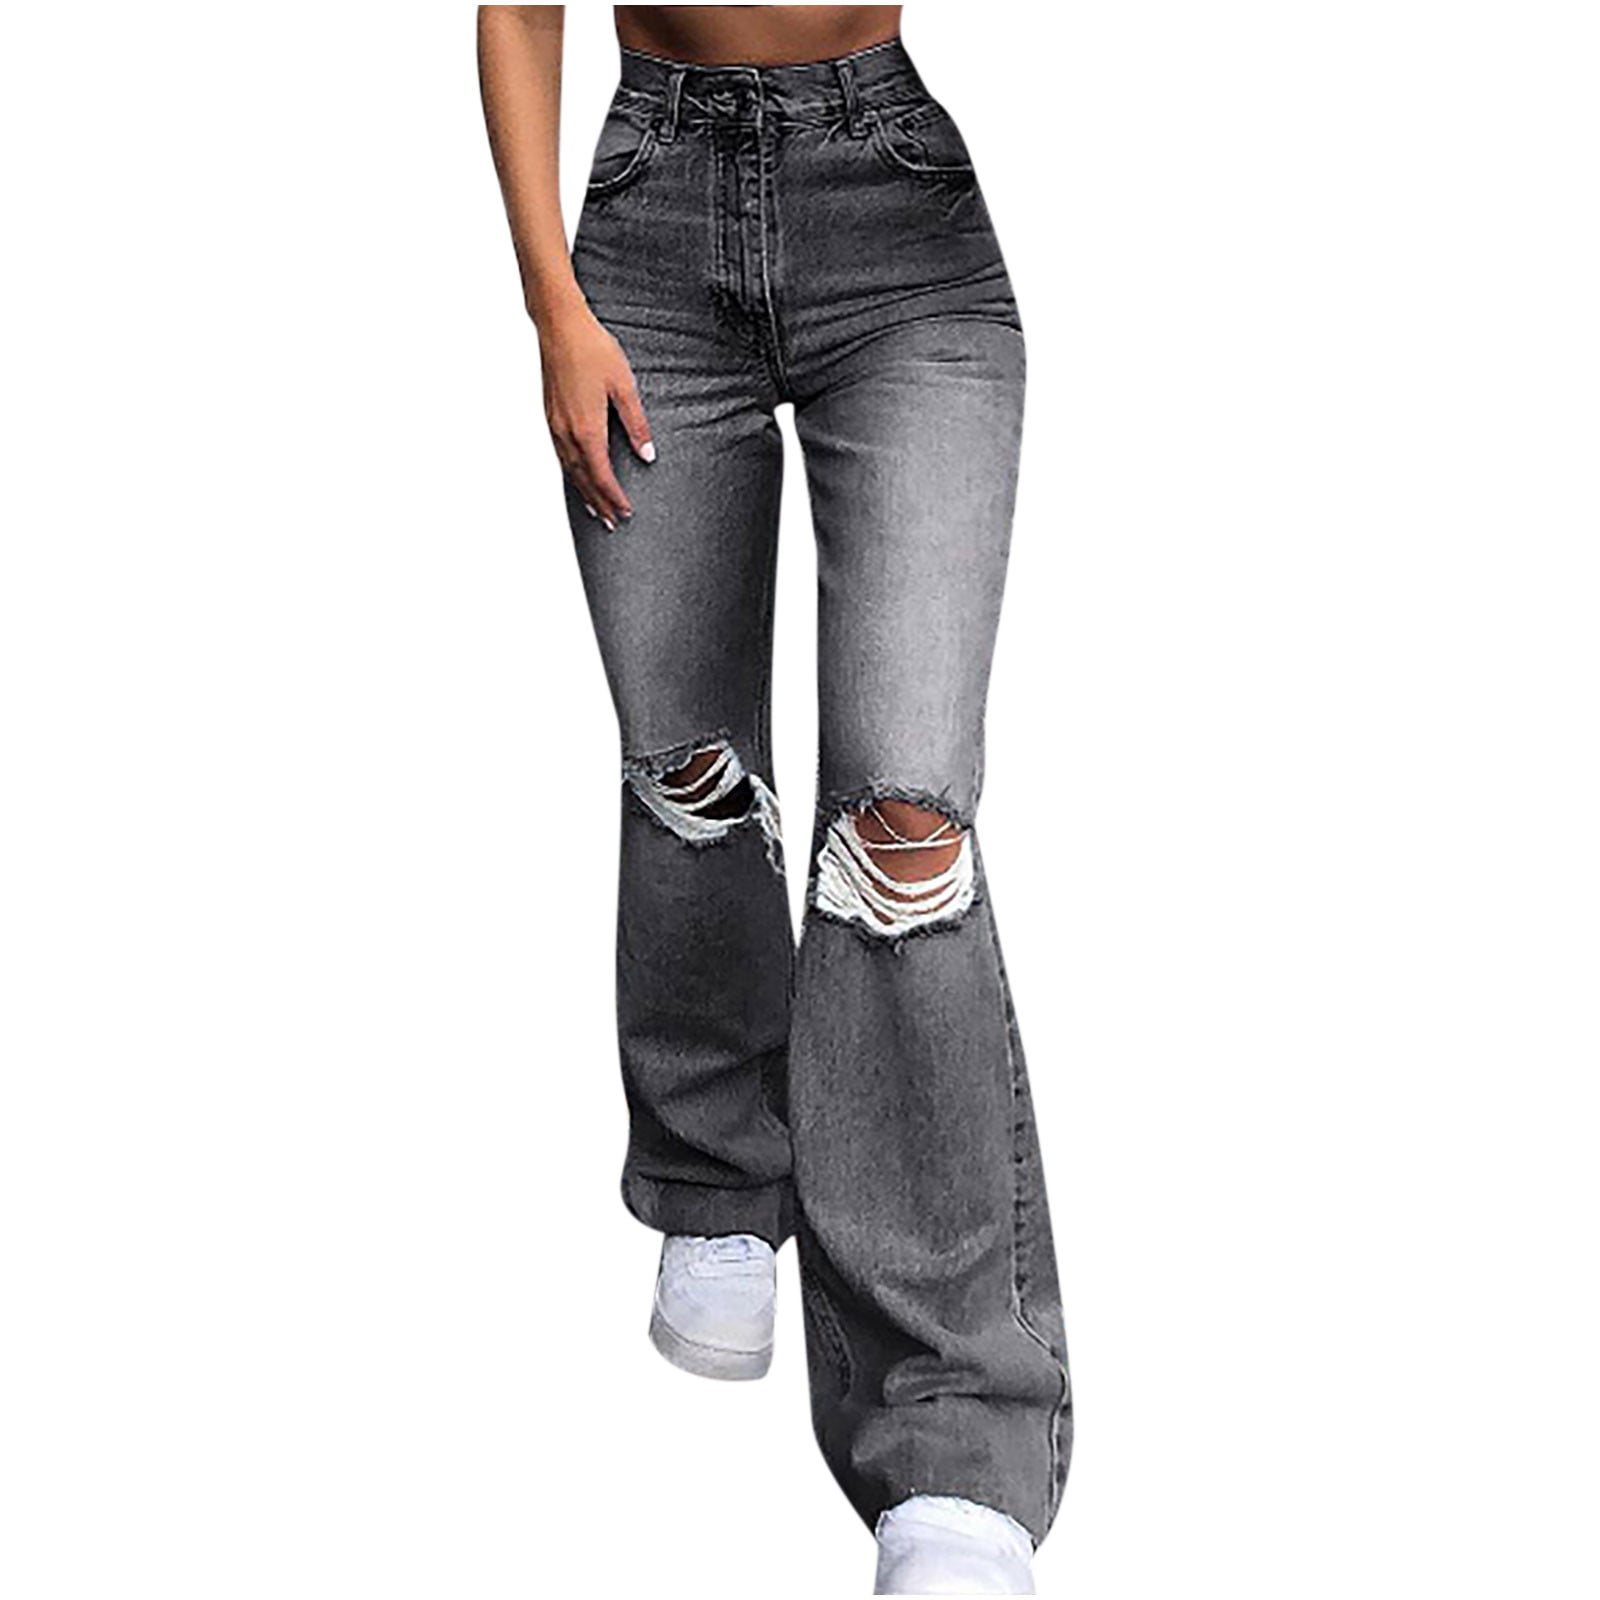 Jeans For Women High Waist Ripped Clearance Women's Fashion Casual Loose  Washed Denim Ripped Jeans Casual Solid Stretch Slim Pants Pink XXL 